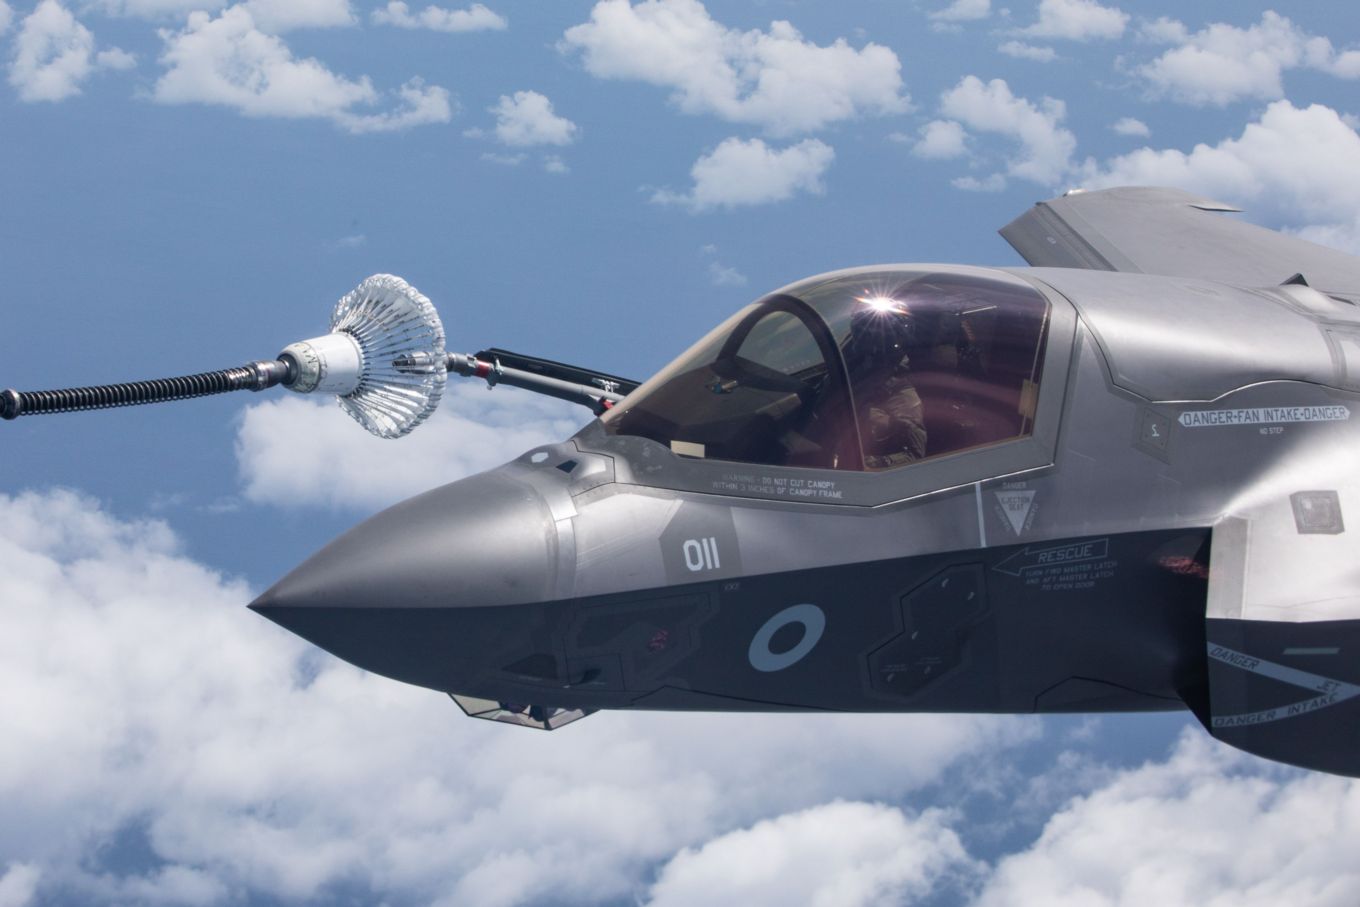 F-35 carrying in flight re-fuelling